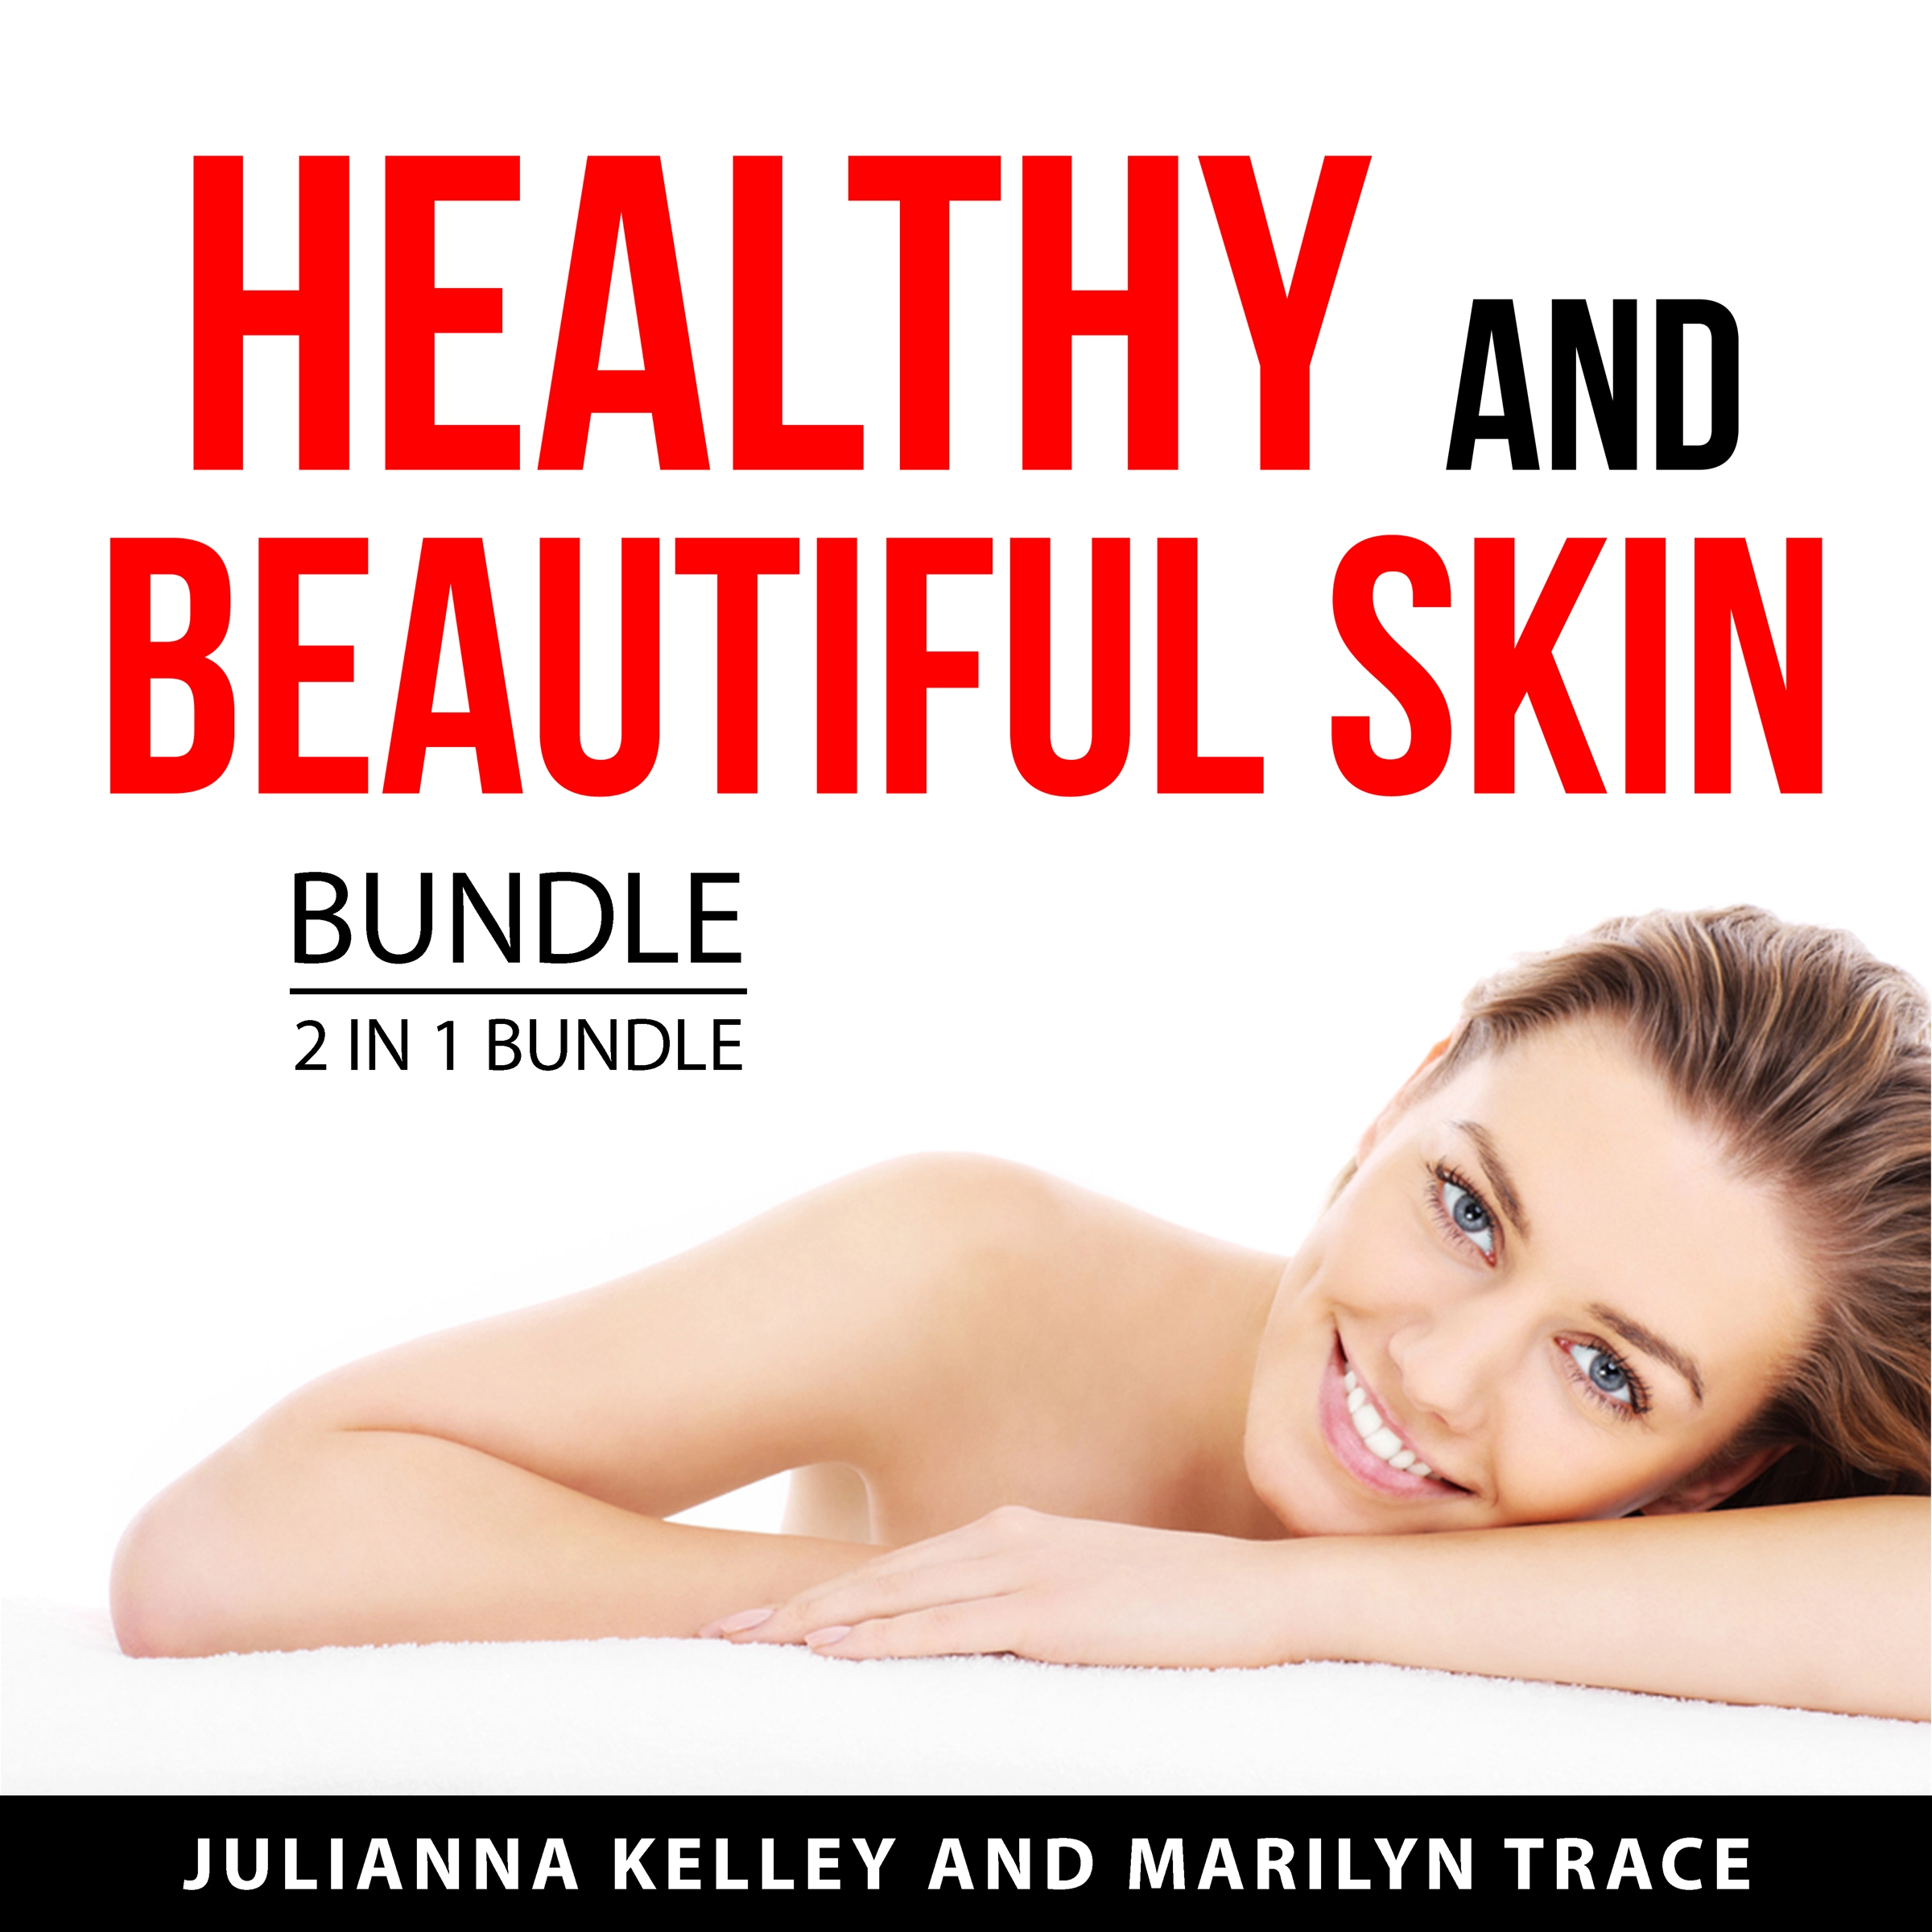 Healthy and Beautiful Skin Bundle, 2 in 1 Bundle Audiobook by Marilyn Trace